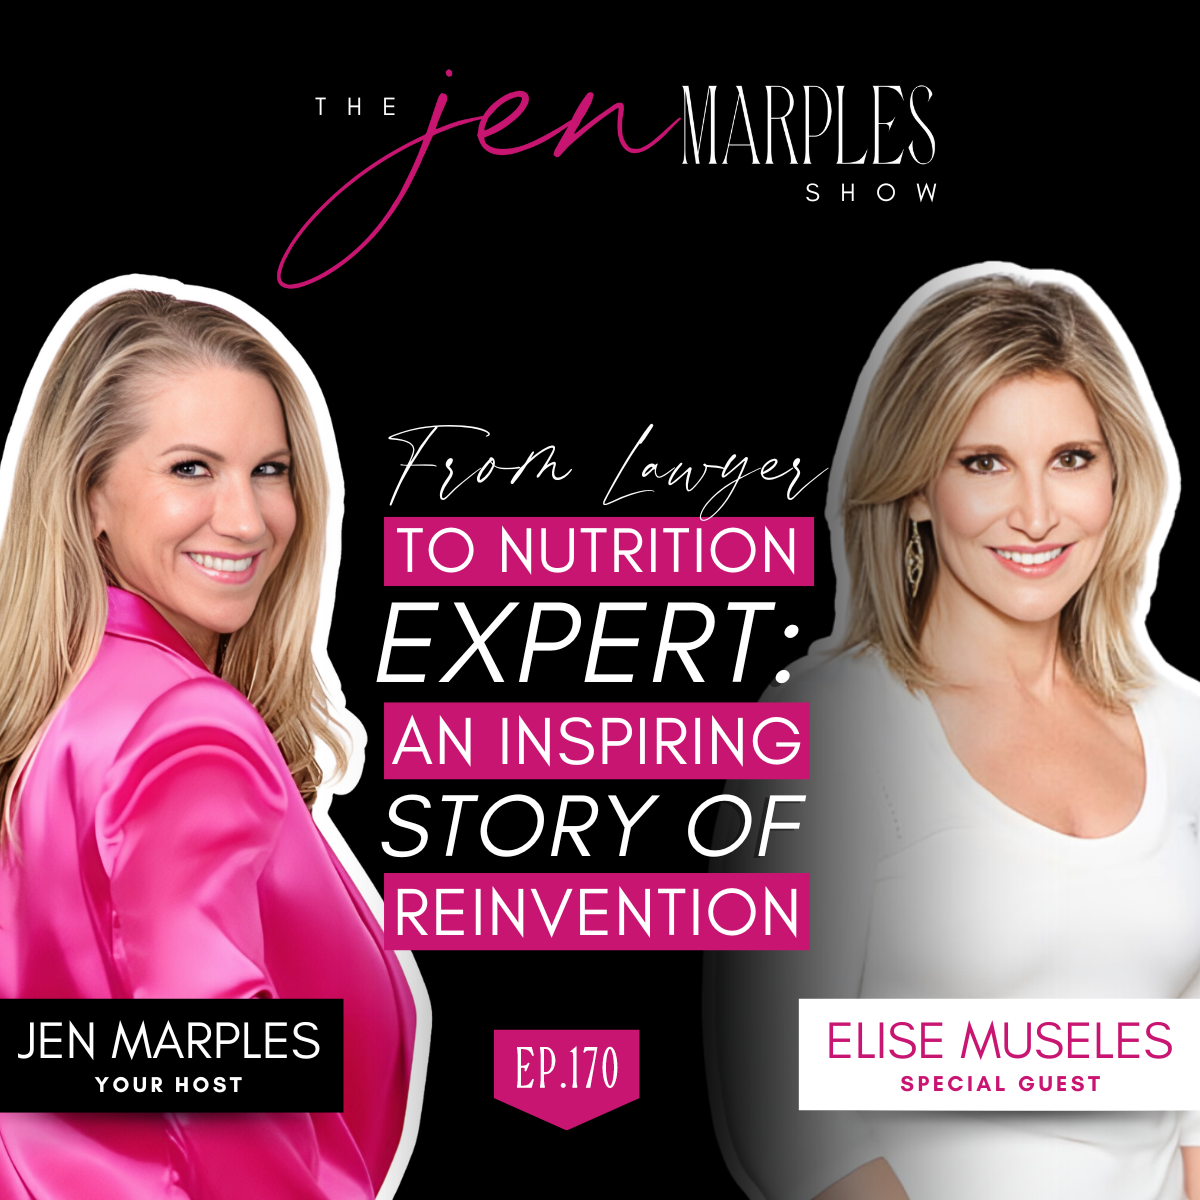 From Lawyer to Nutrition Expert: An Inspiring Story of Reinvention with Elise Museles